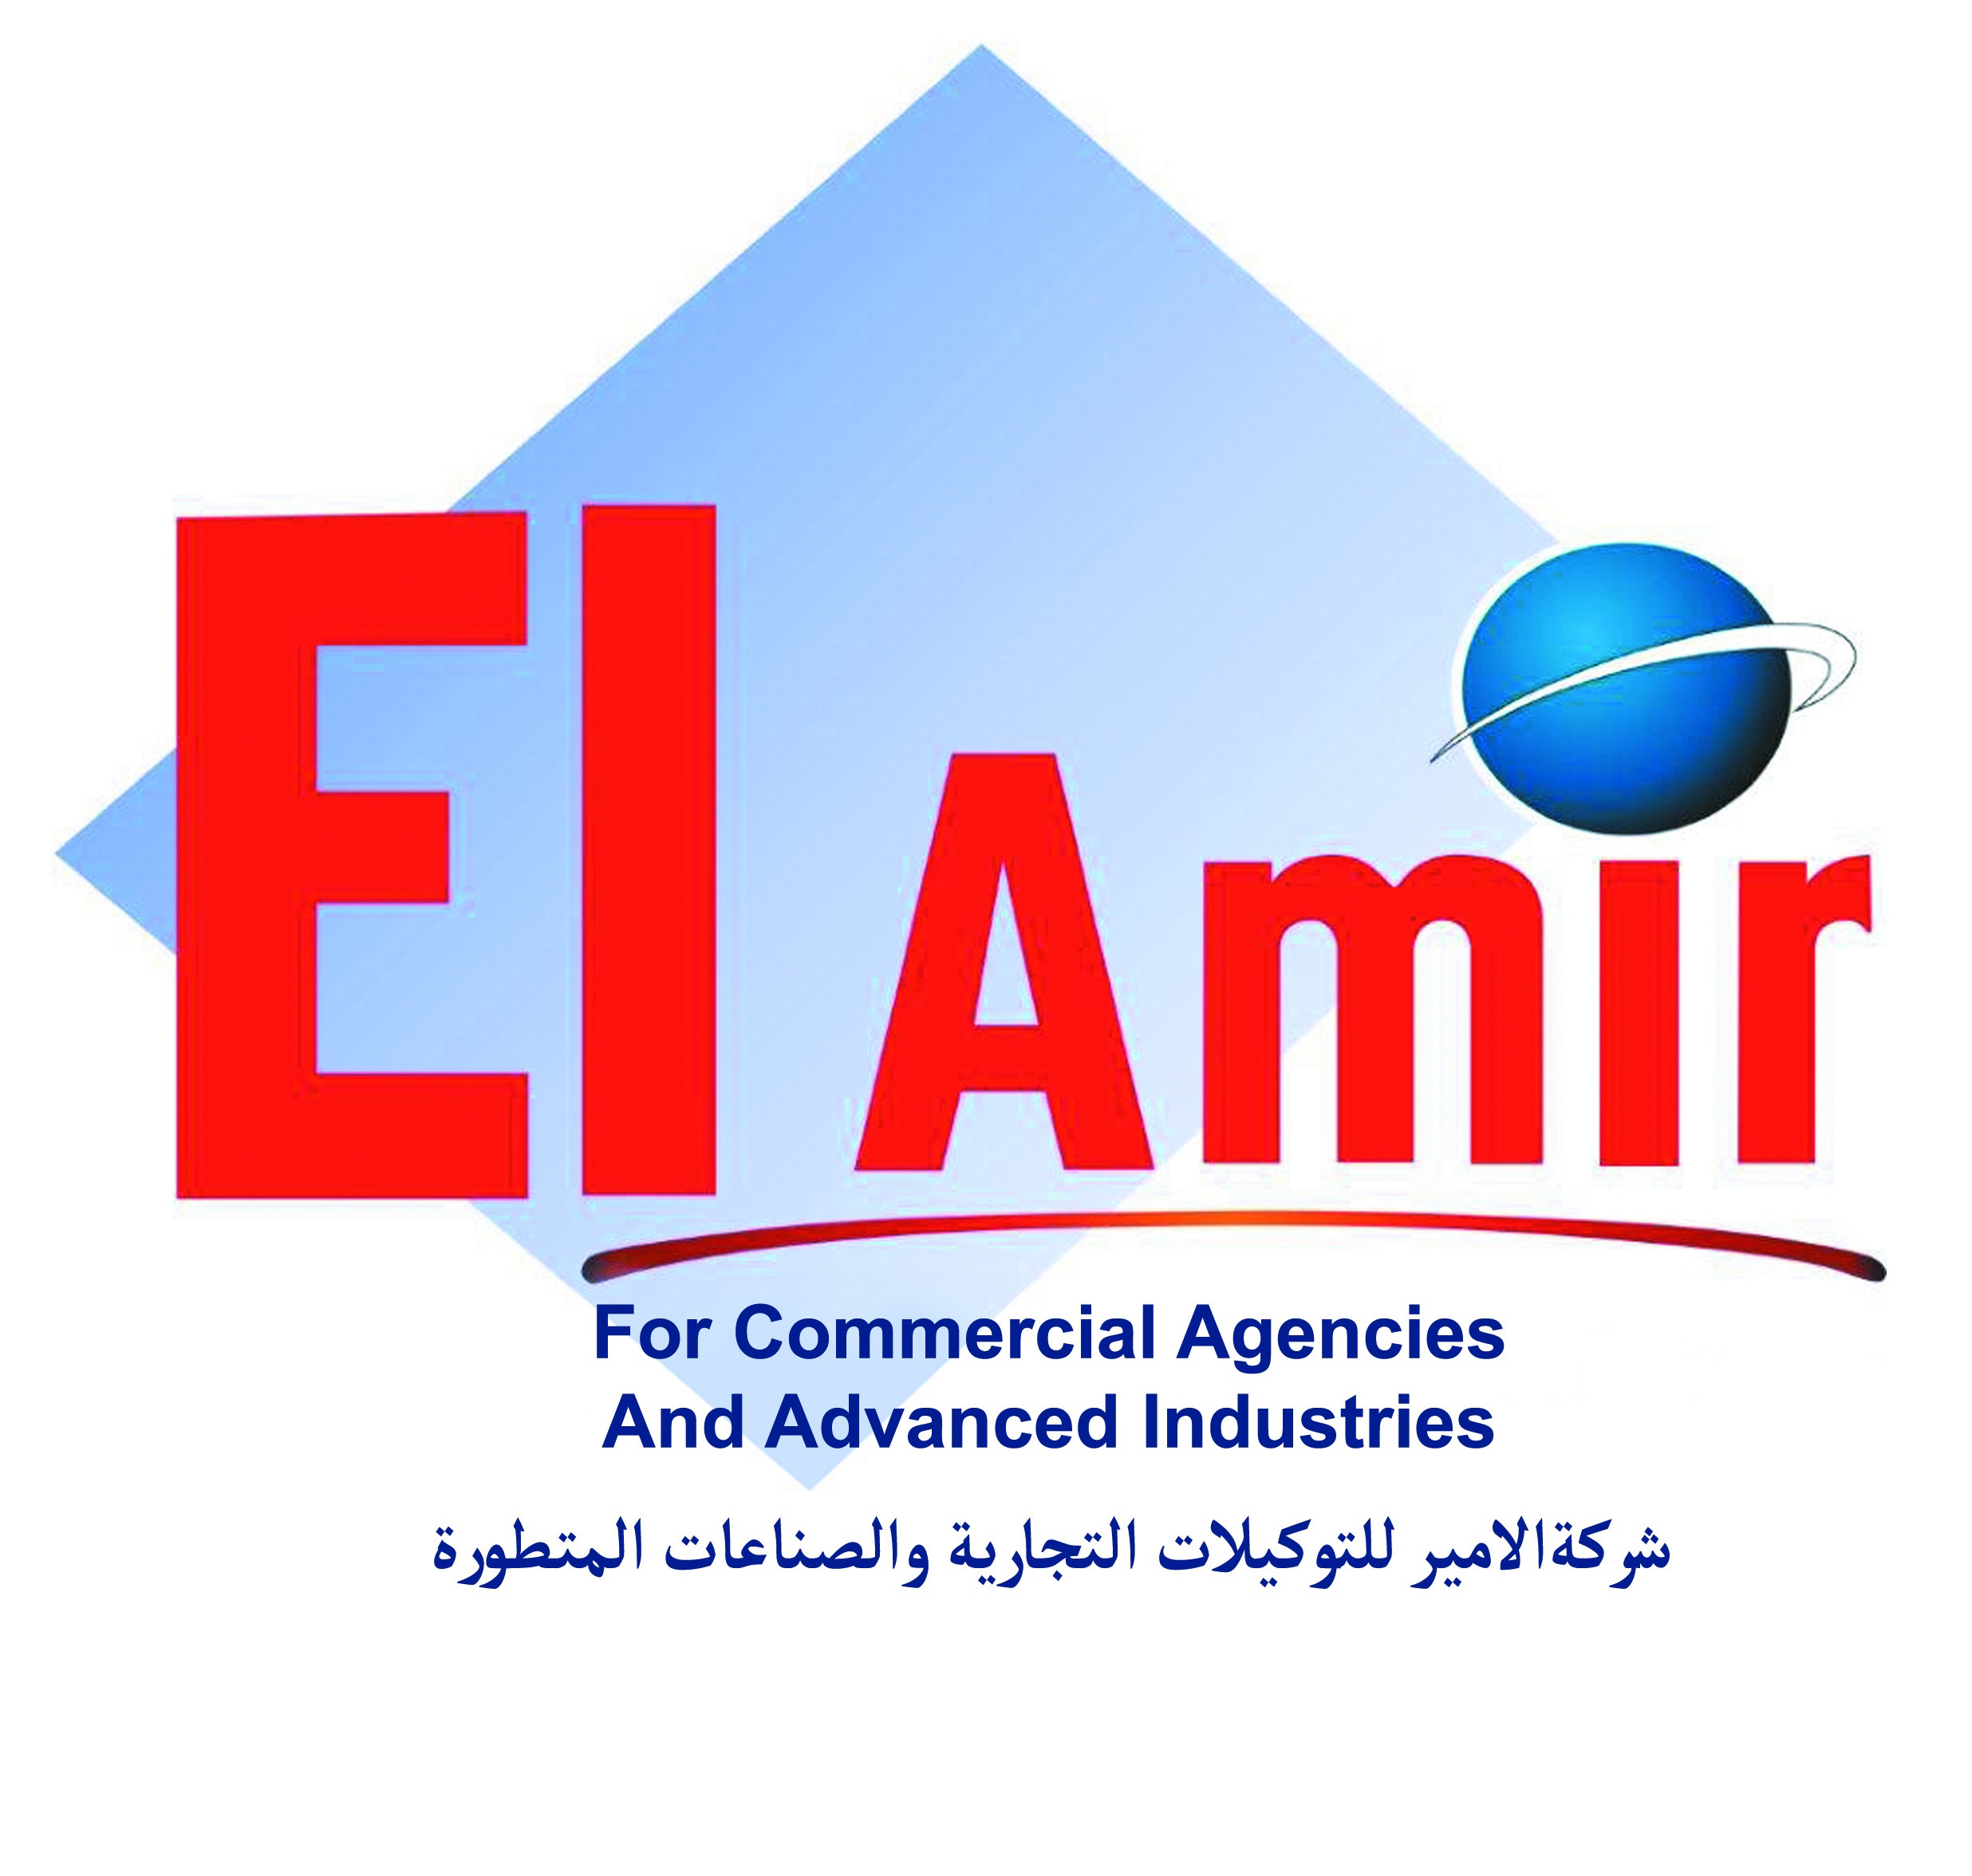 El-Amir for Trading and advanced industries